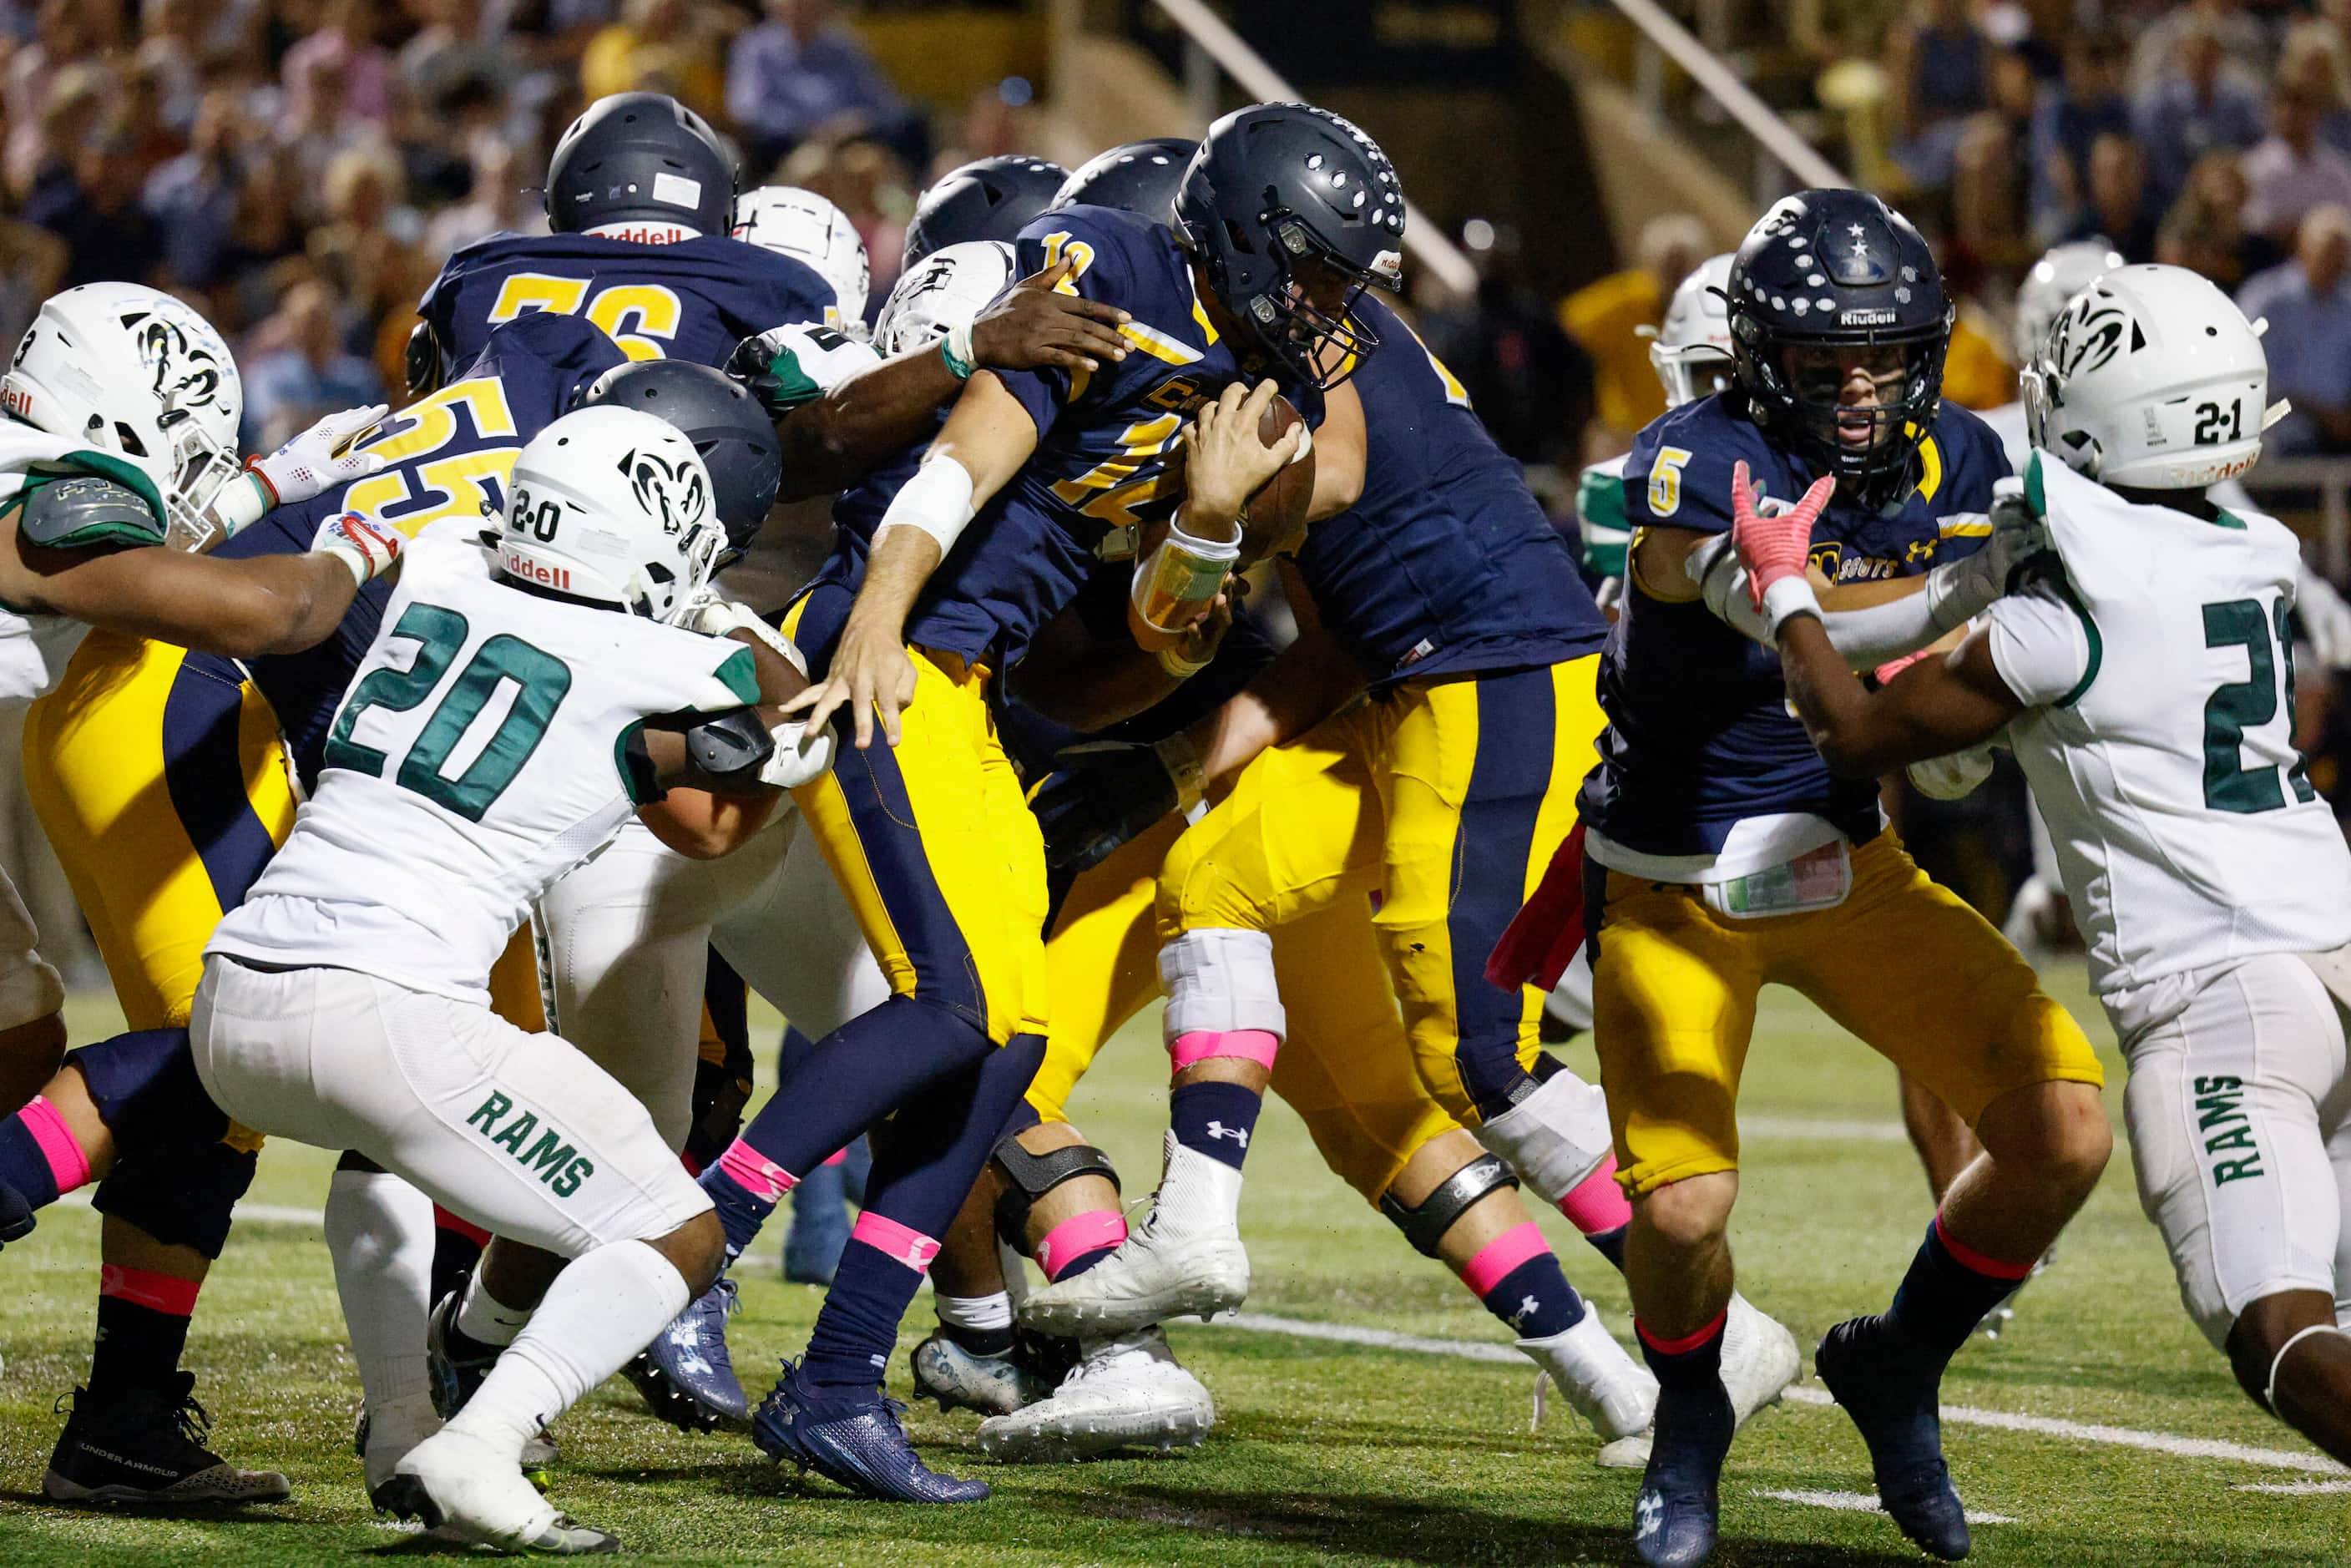 Highland Park quarterback Warren Peck (12) pushes through the line of scrimmage to pick up a...